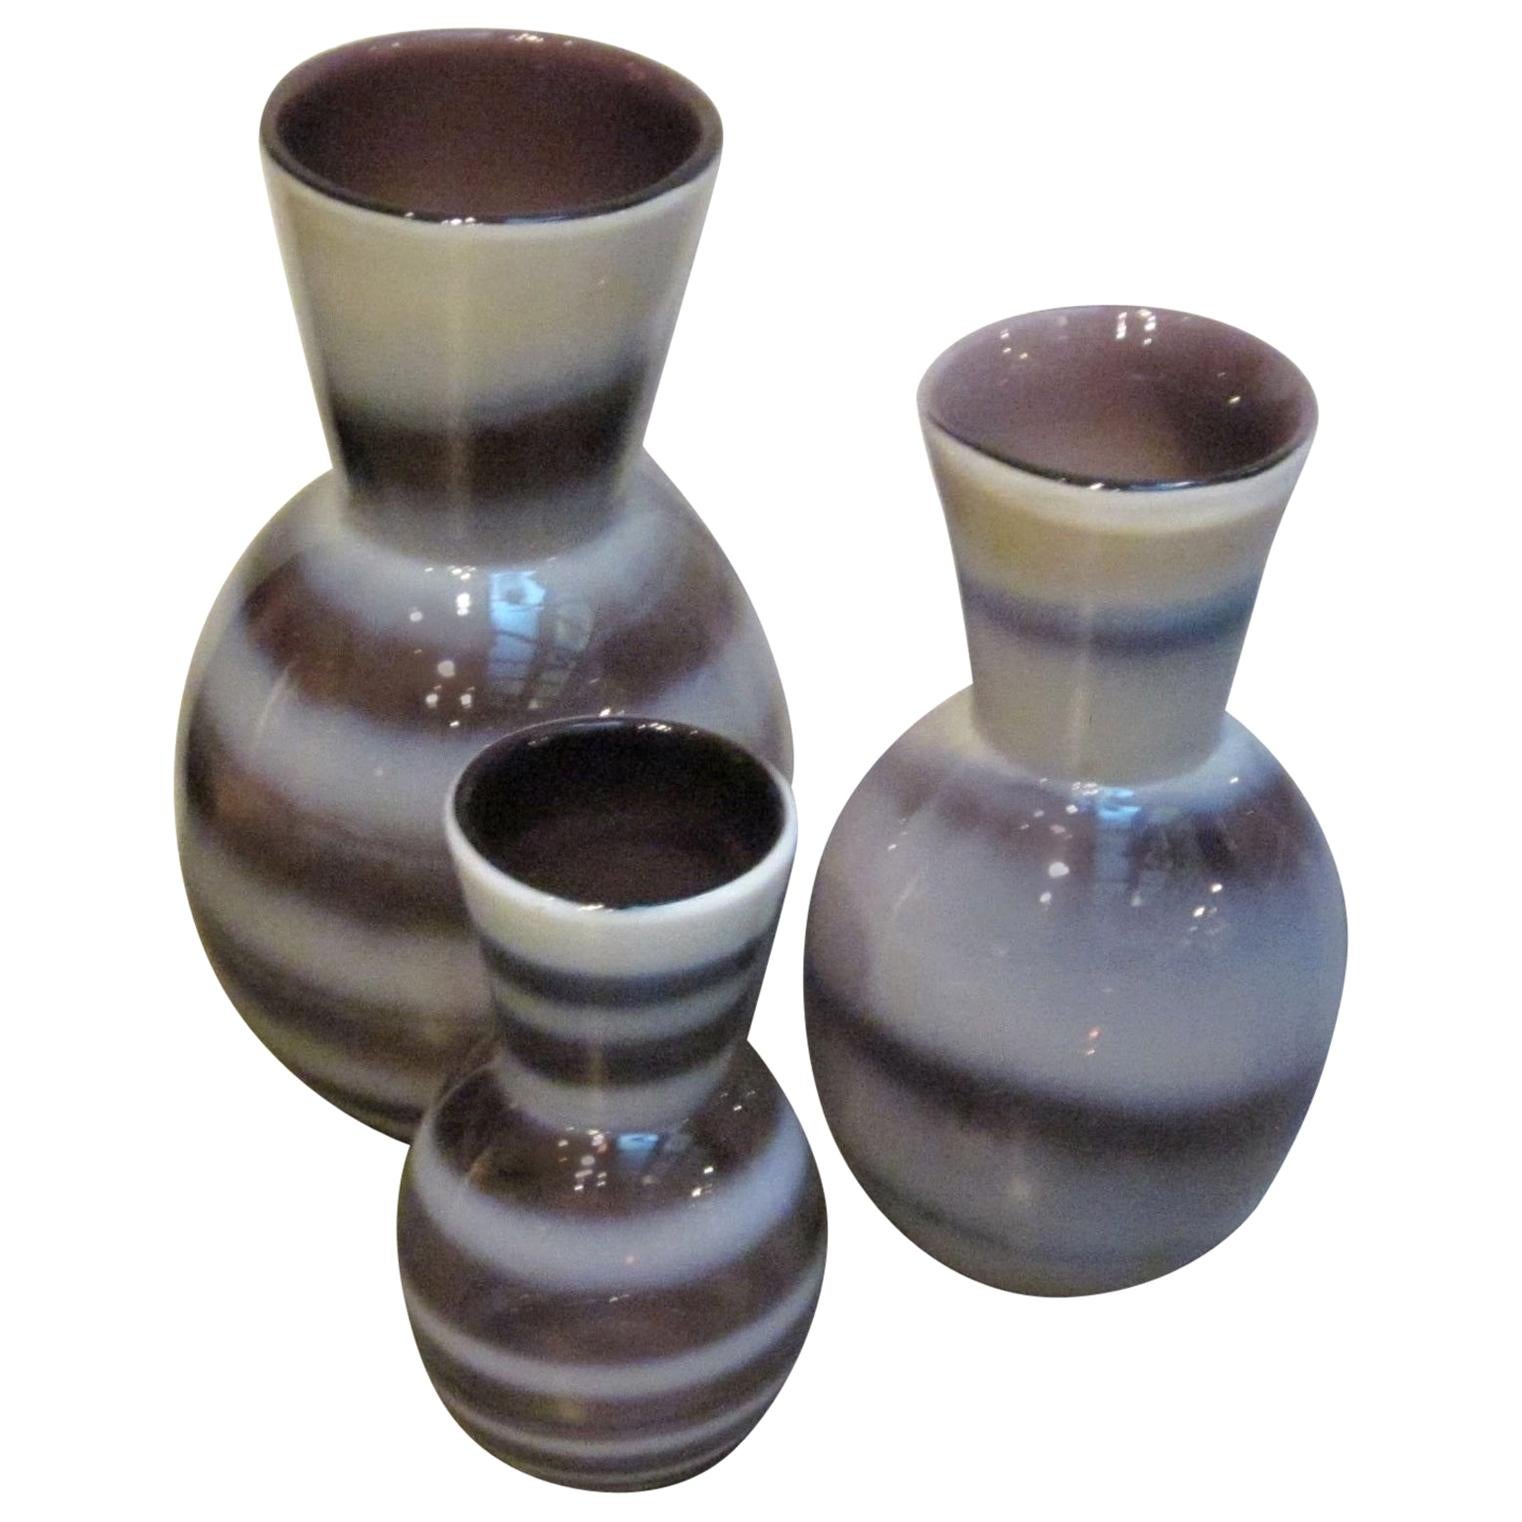 Purple and White Set of Three Glass Vases, China, Contemporary